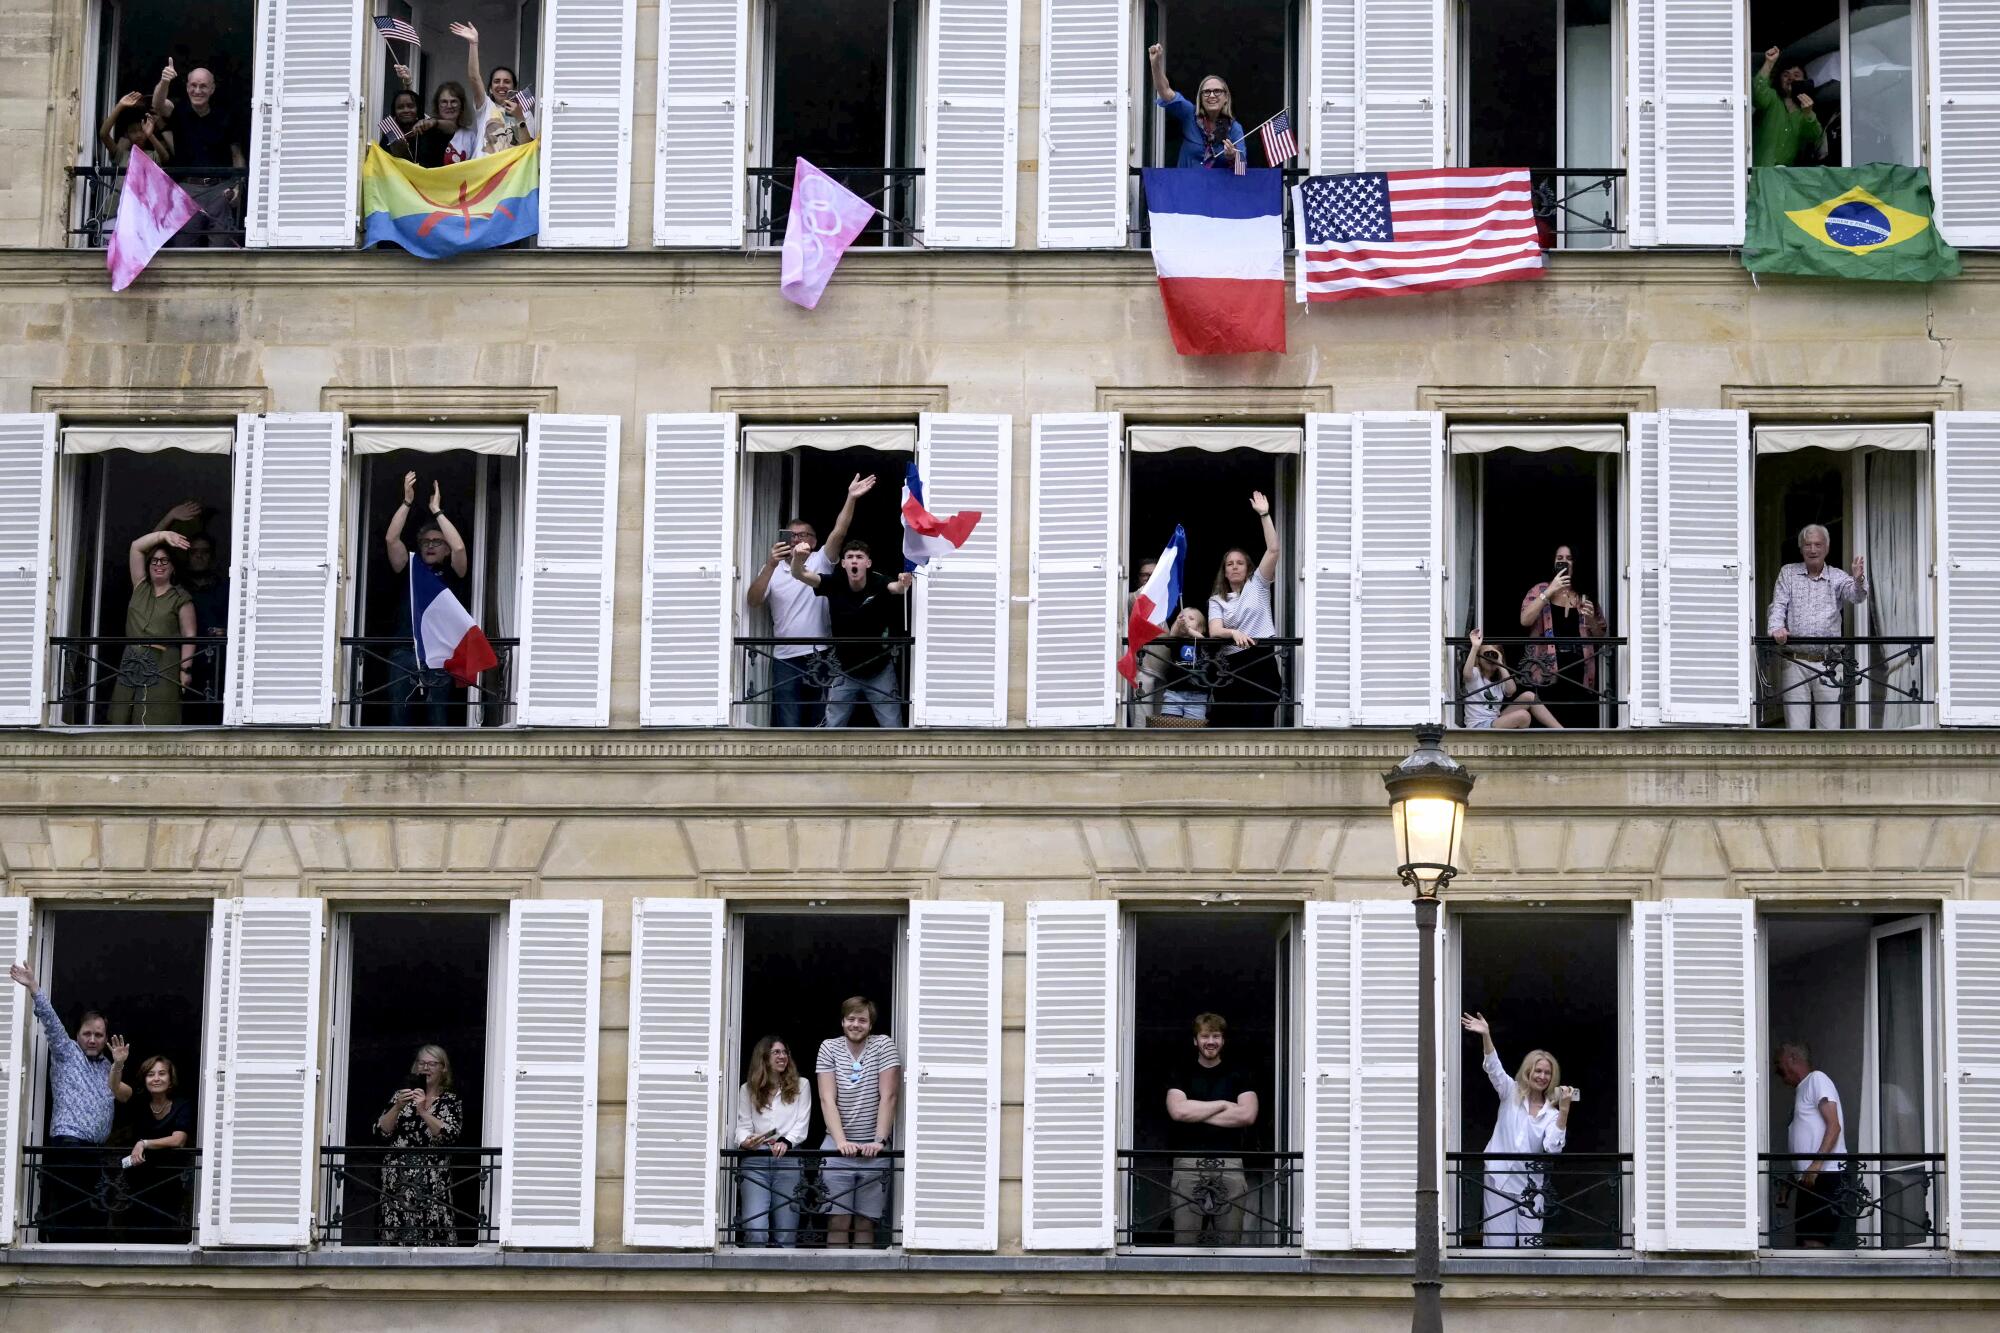 Spectators with various international flags cheering on from their balconies.